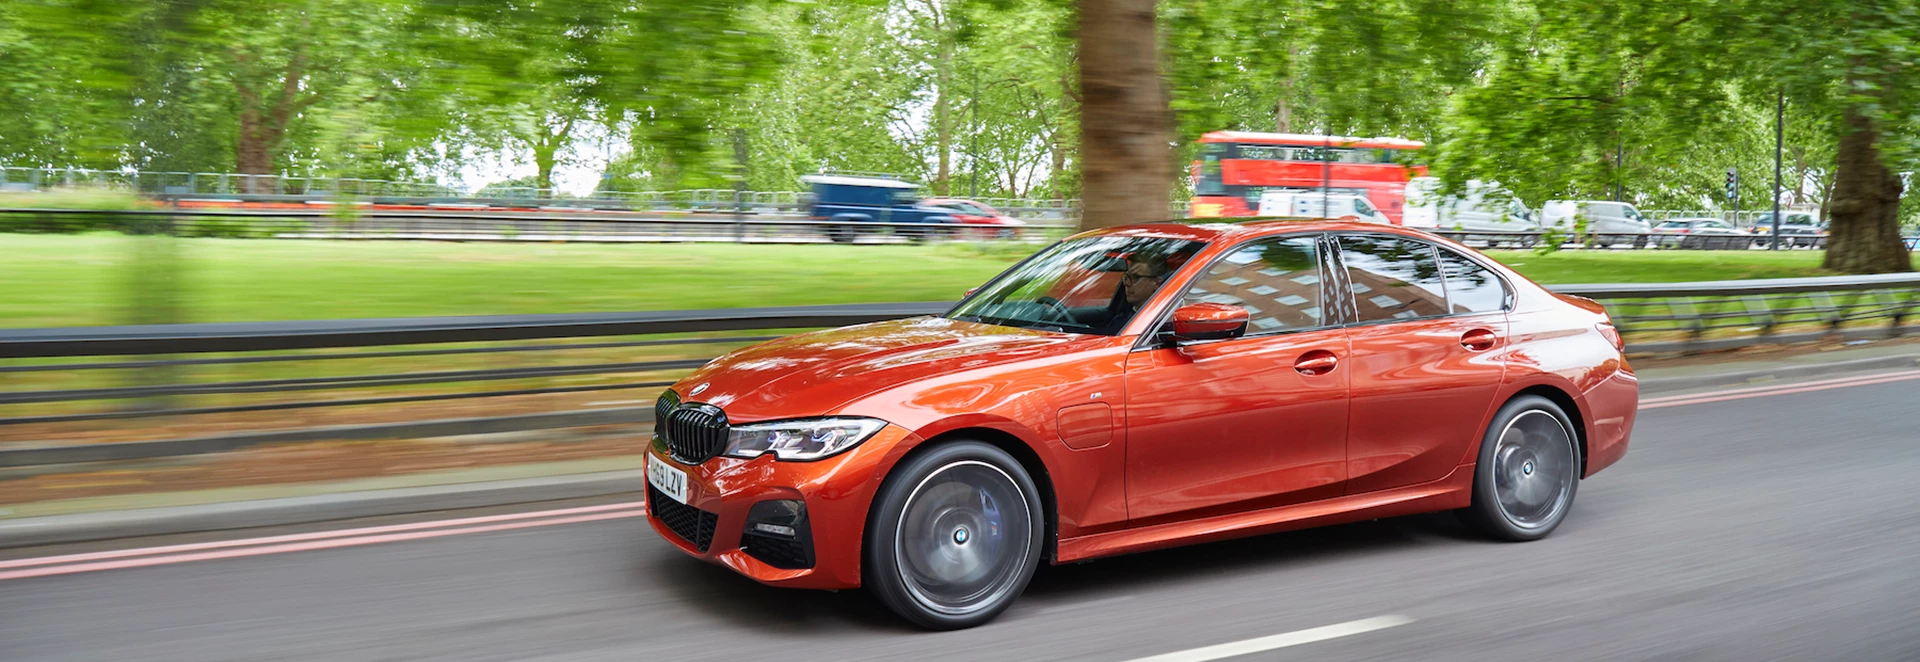 BMW launches eDrive Zones in UK, which can automatically switch PHEVs to electricity 